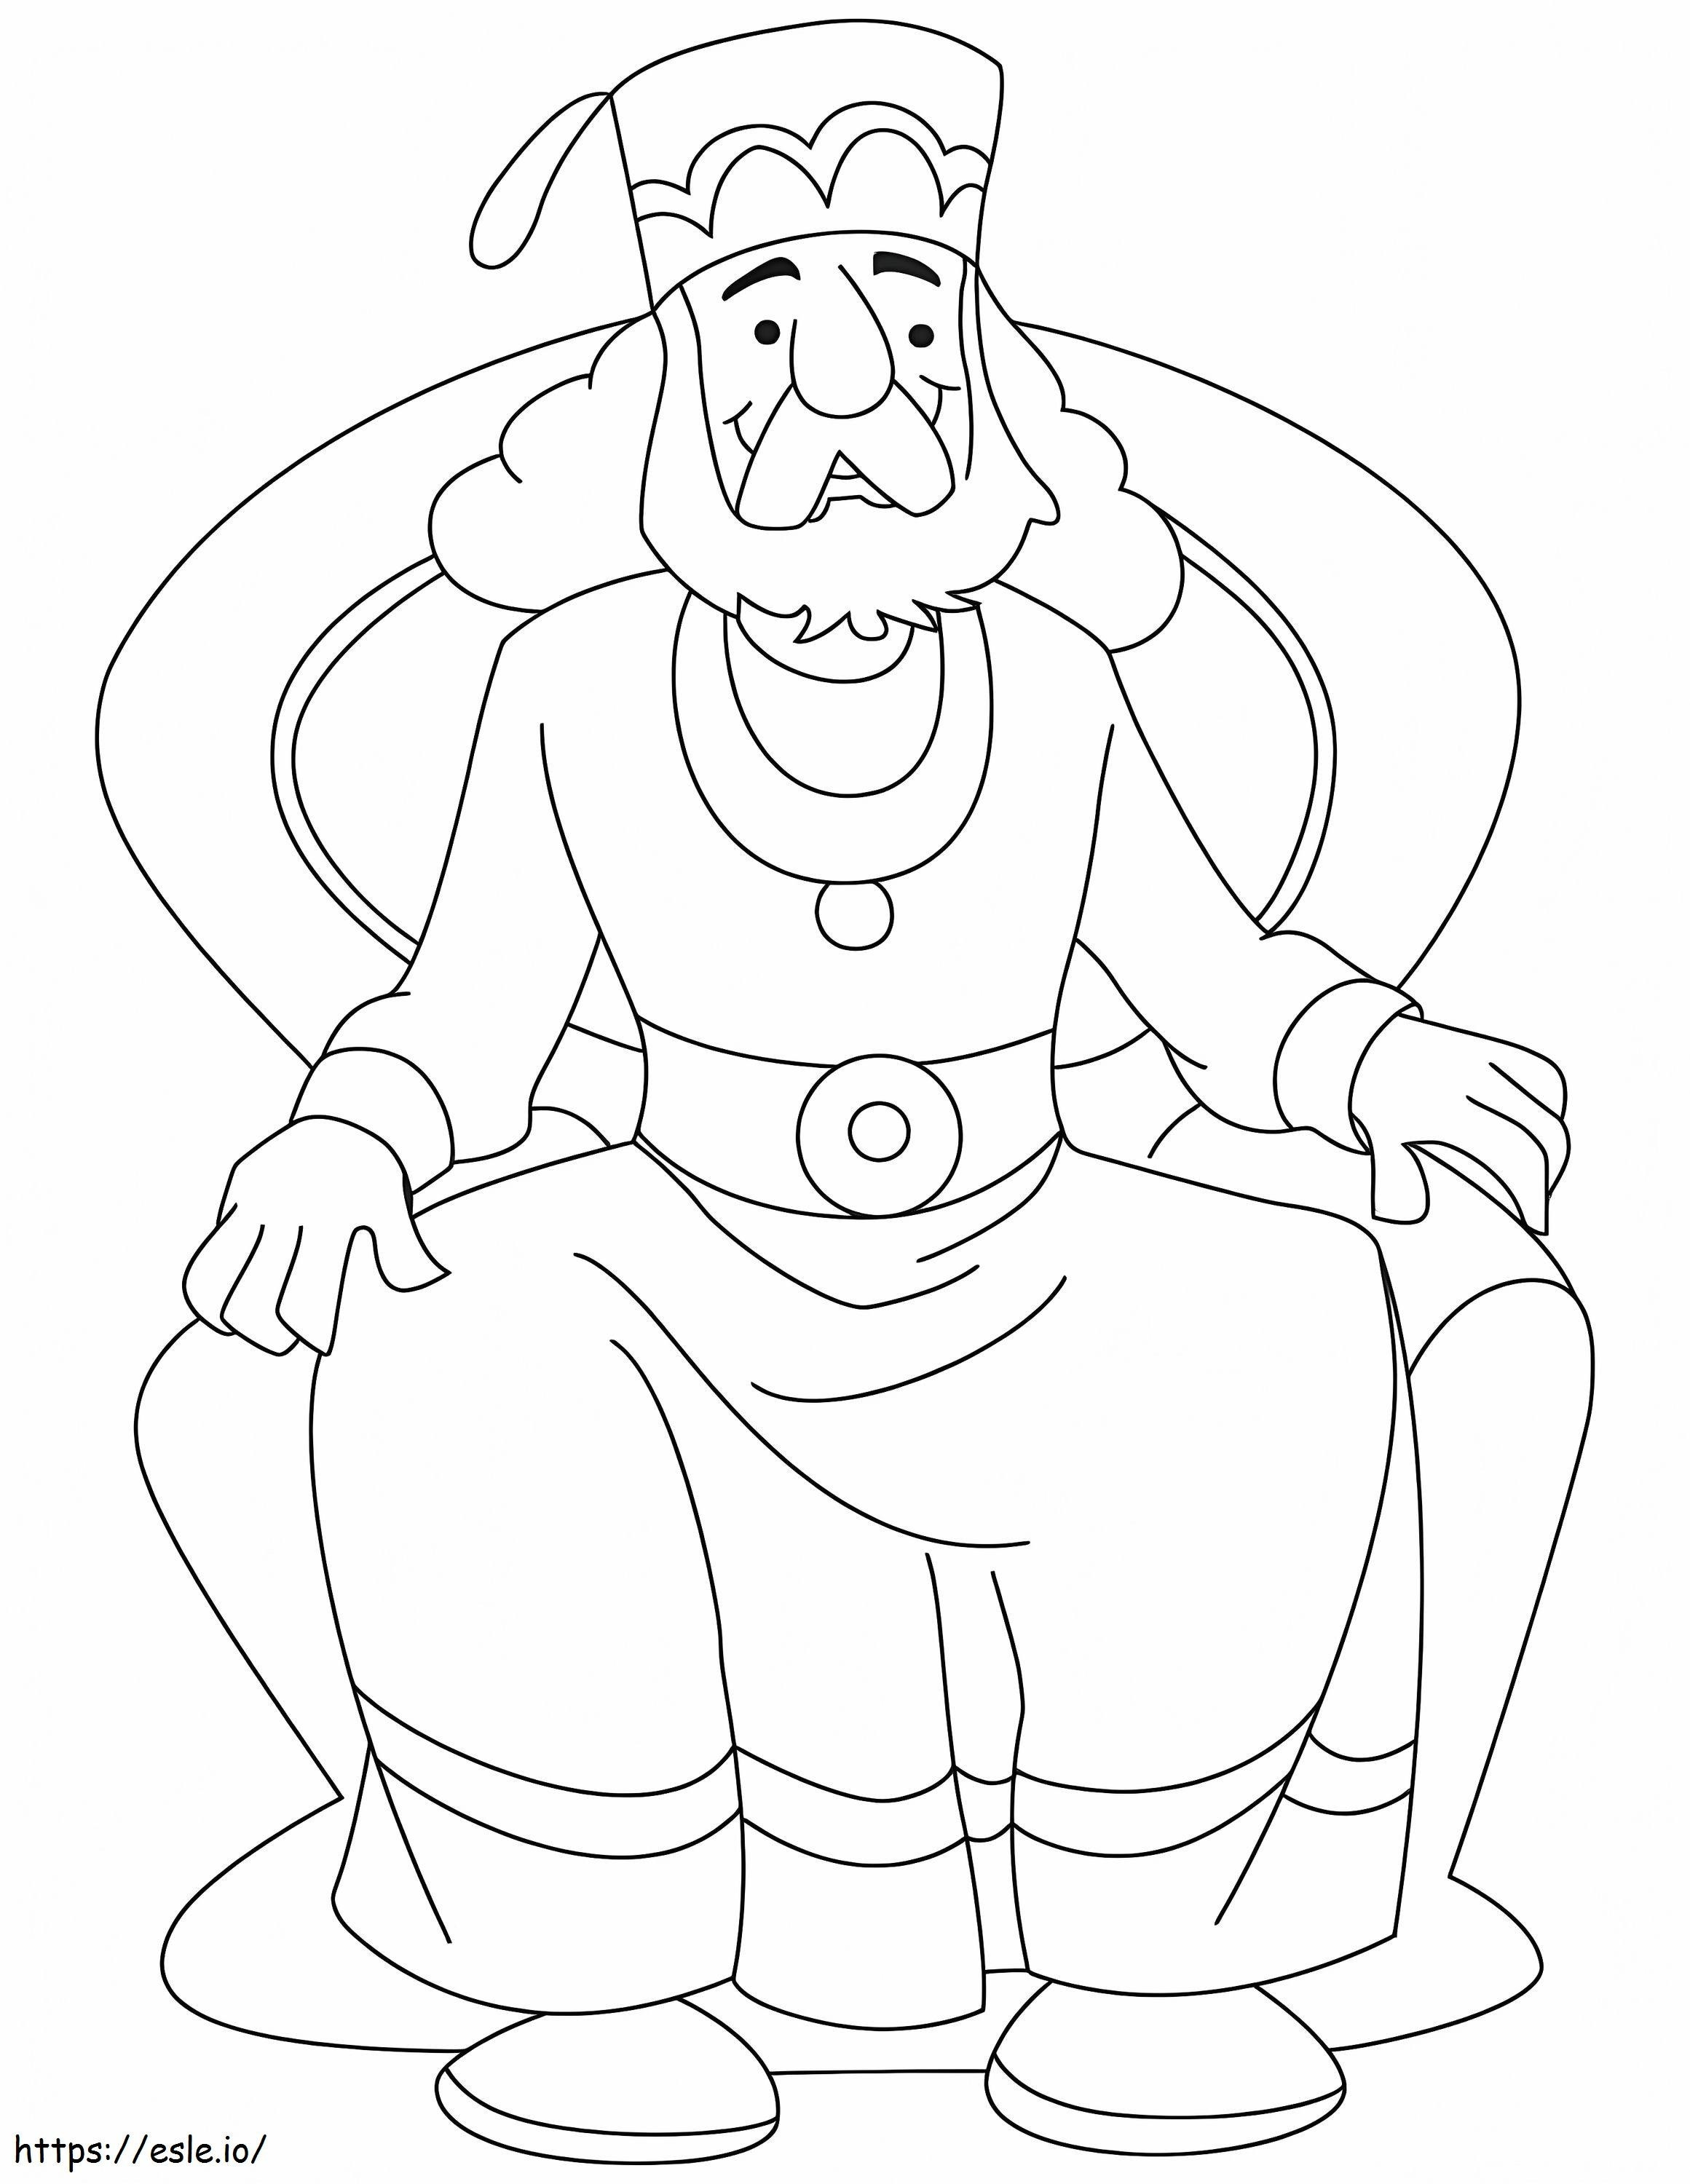 Old King Sitting On The Chair coloring page